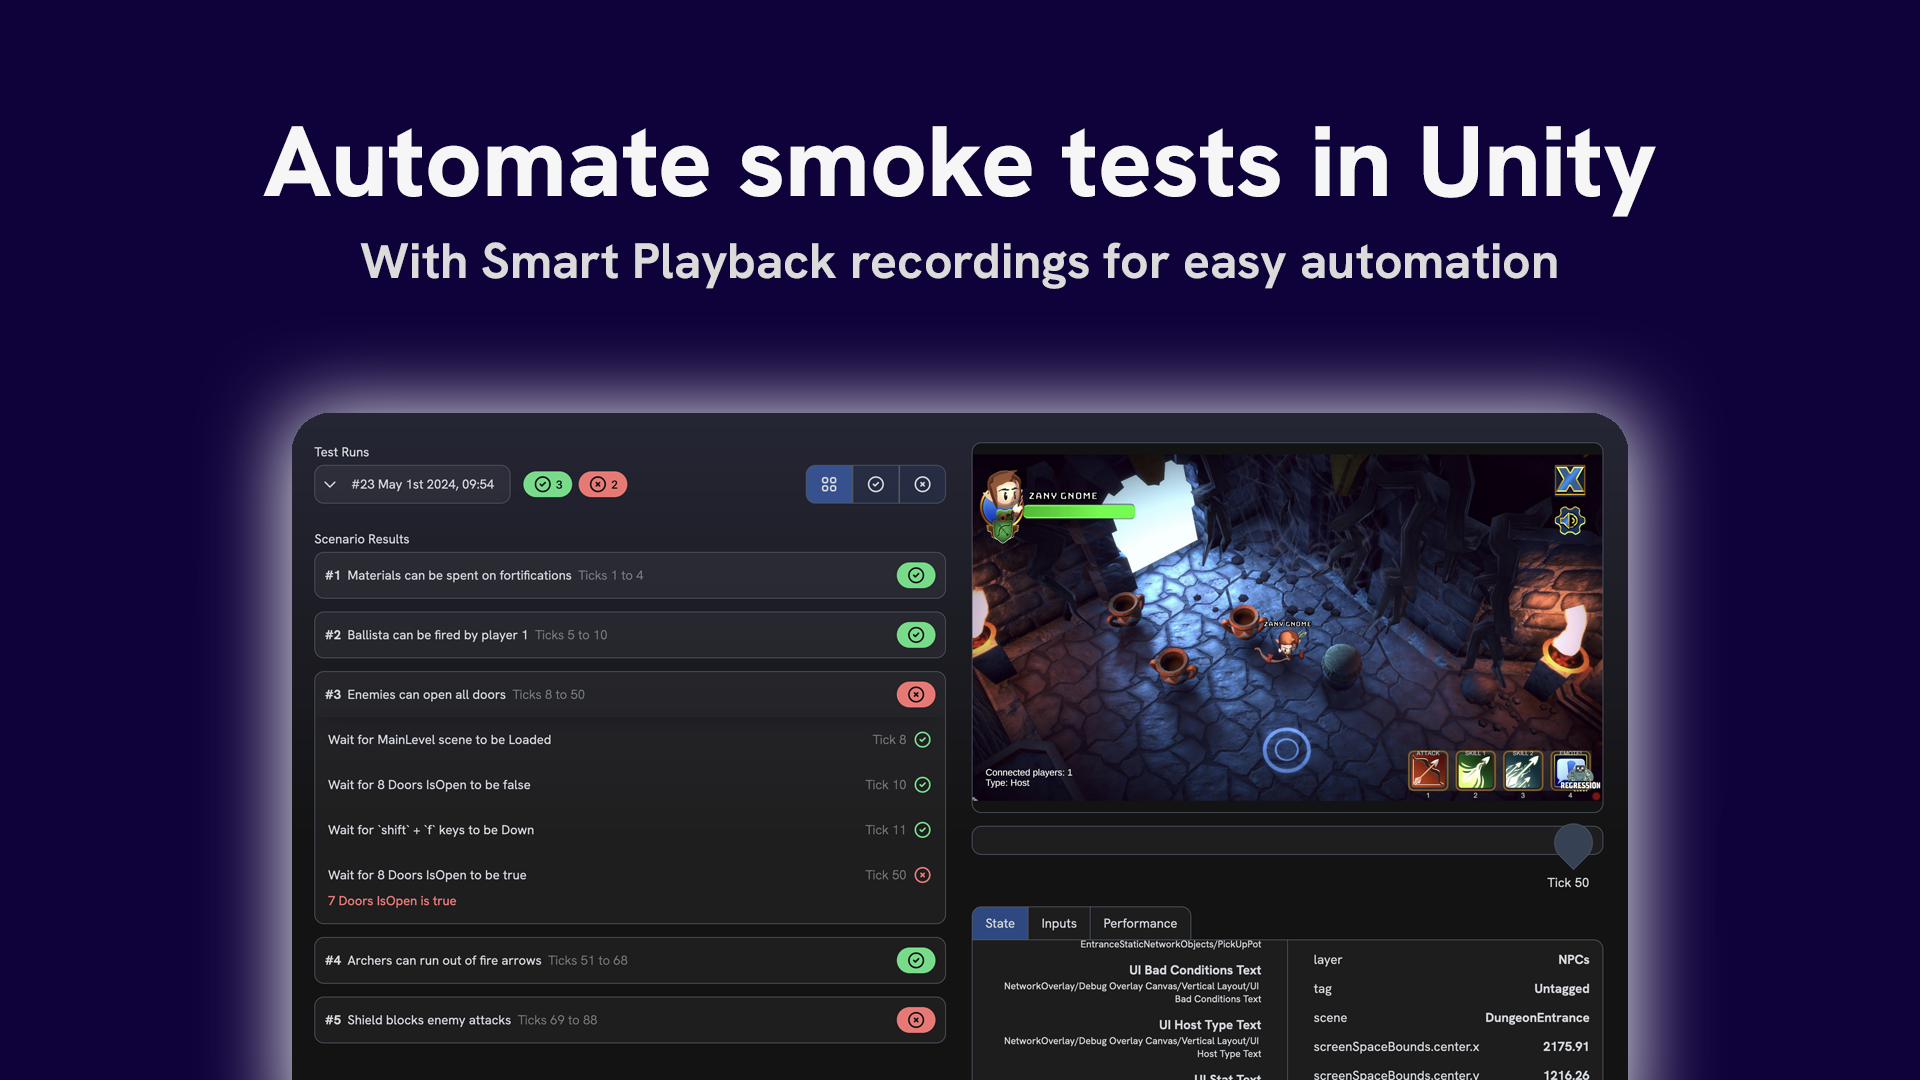 regression-games - Automated smoke testing in Unity